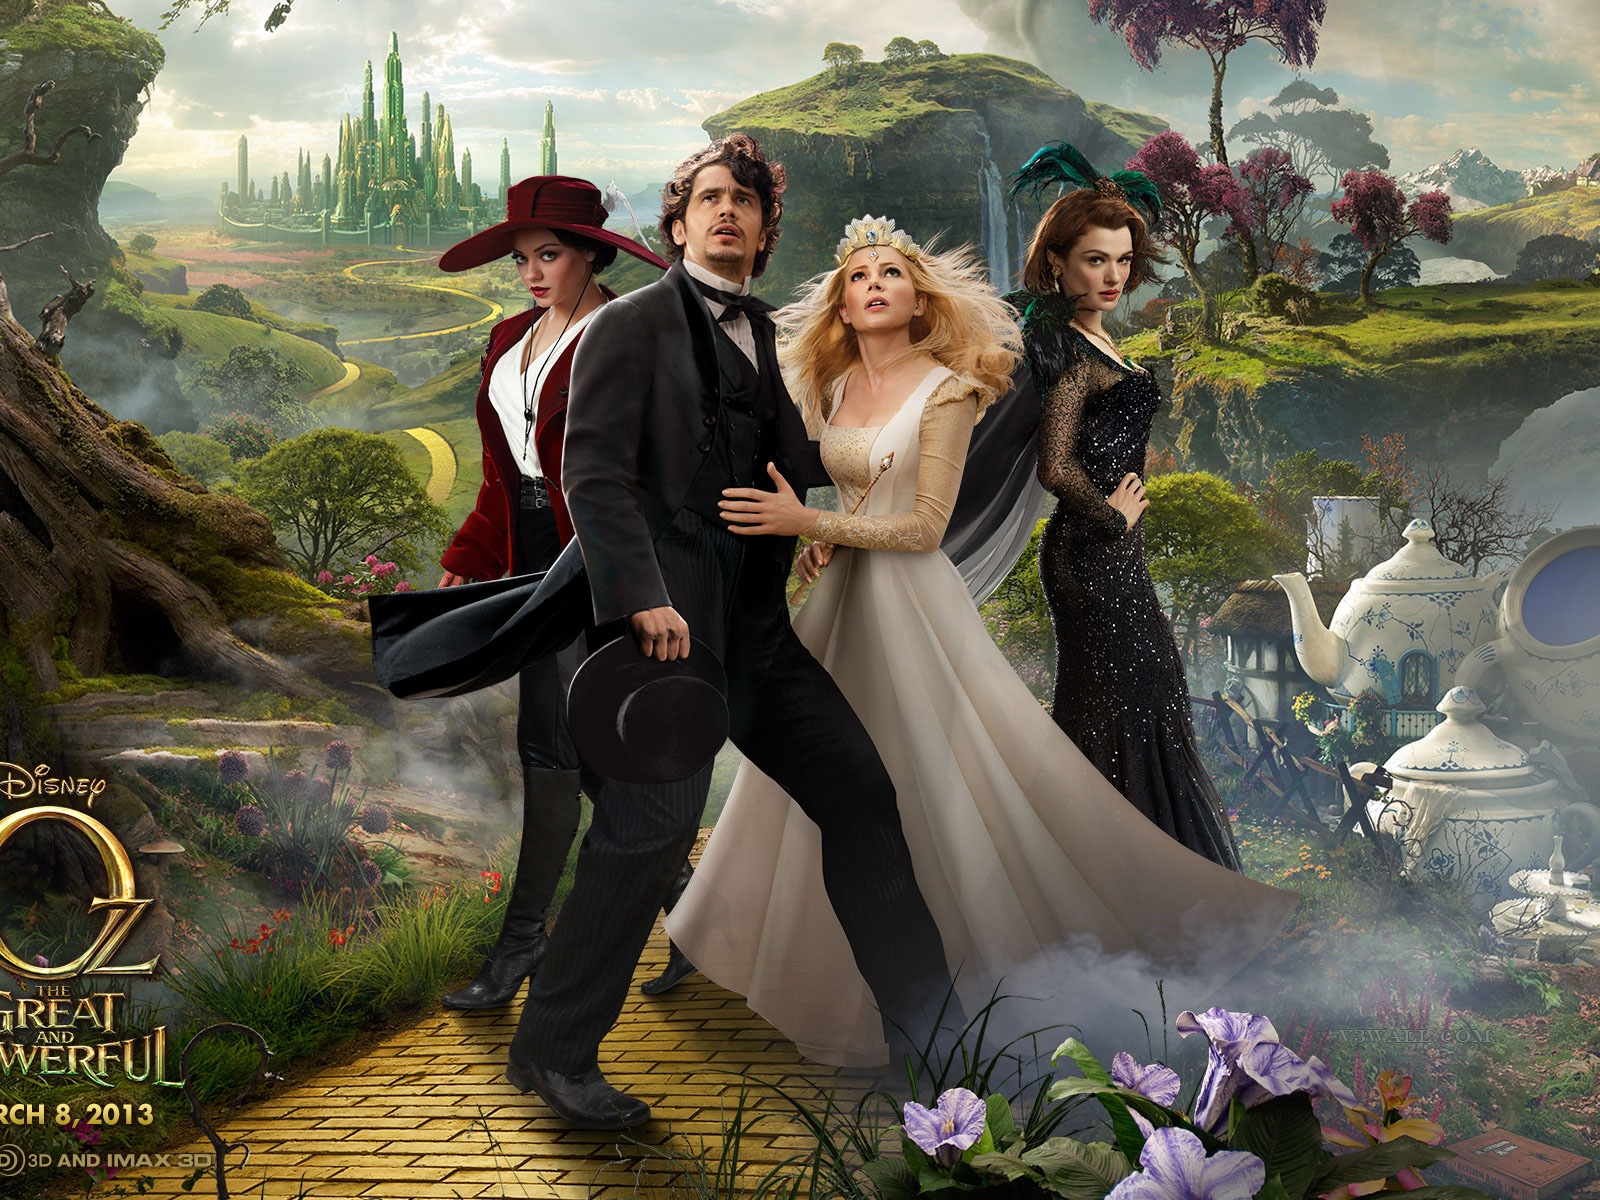 Oz The Great and Powerful 绿野仙踪 高清壁纸1 - 1600x1200